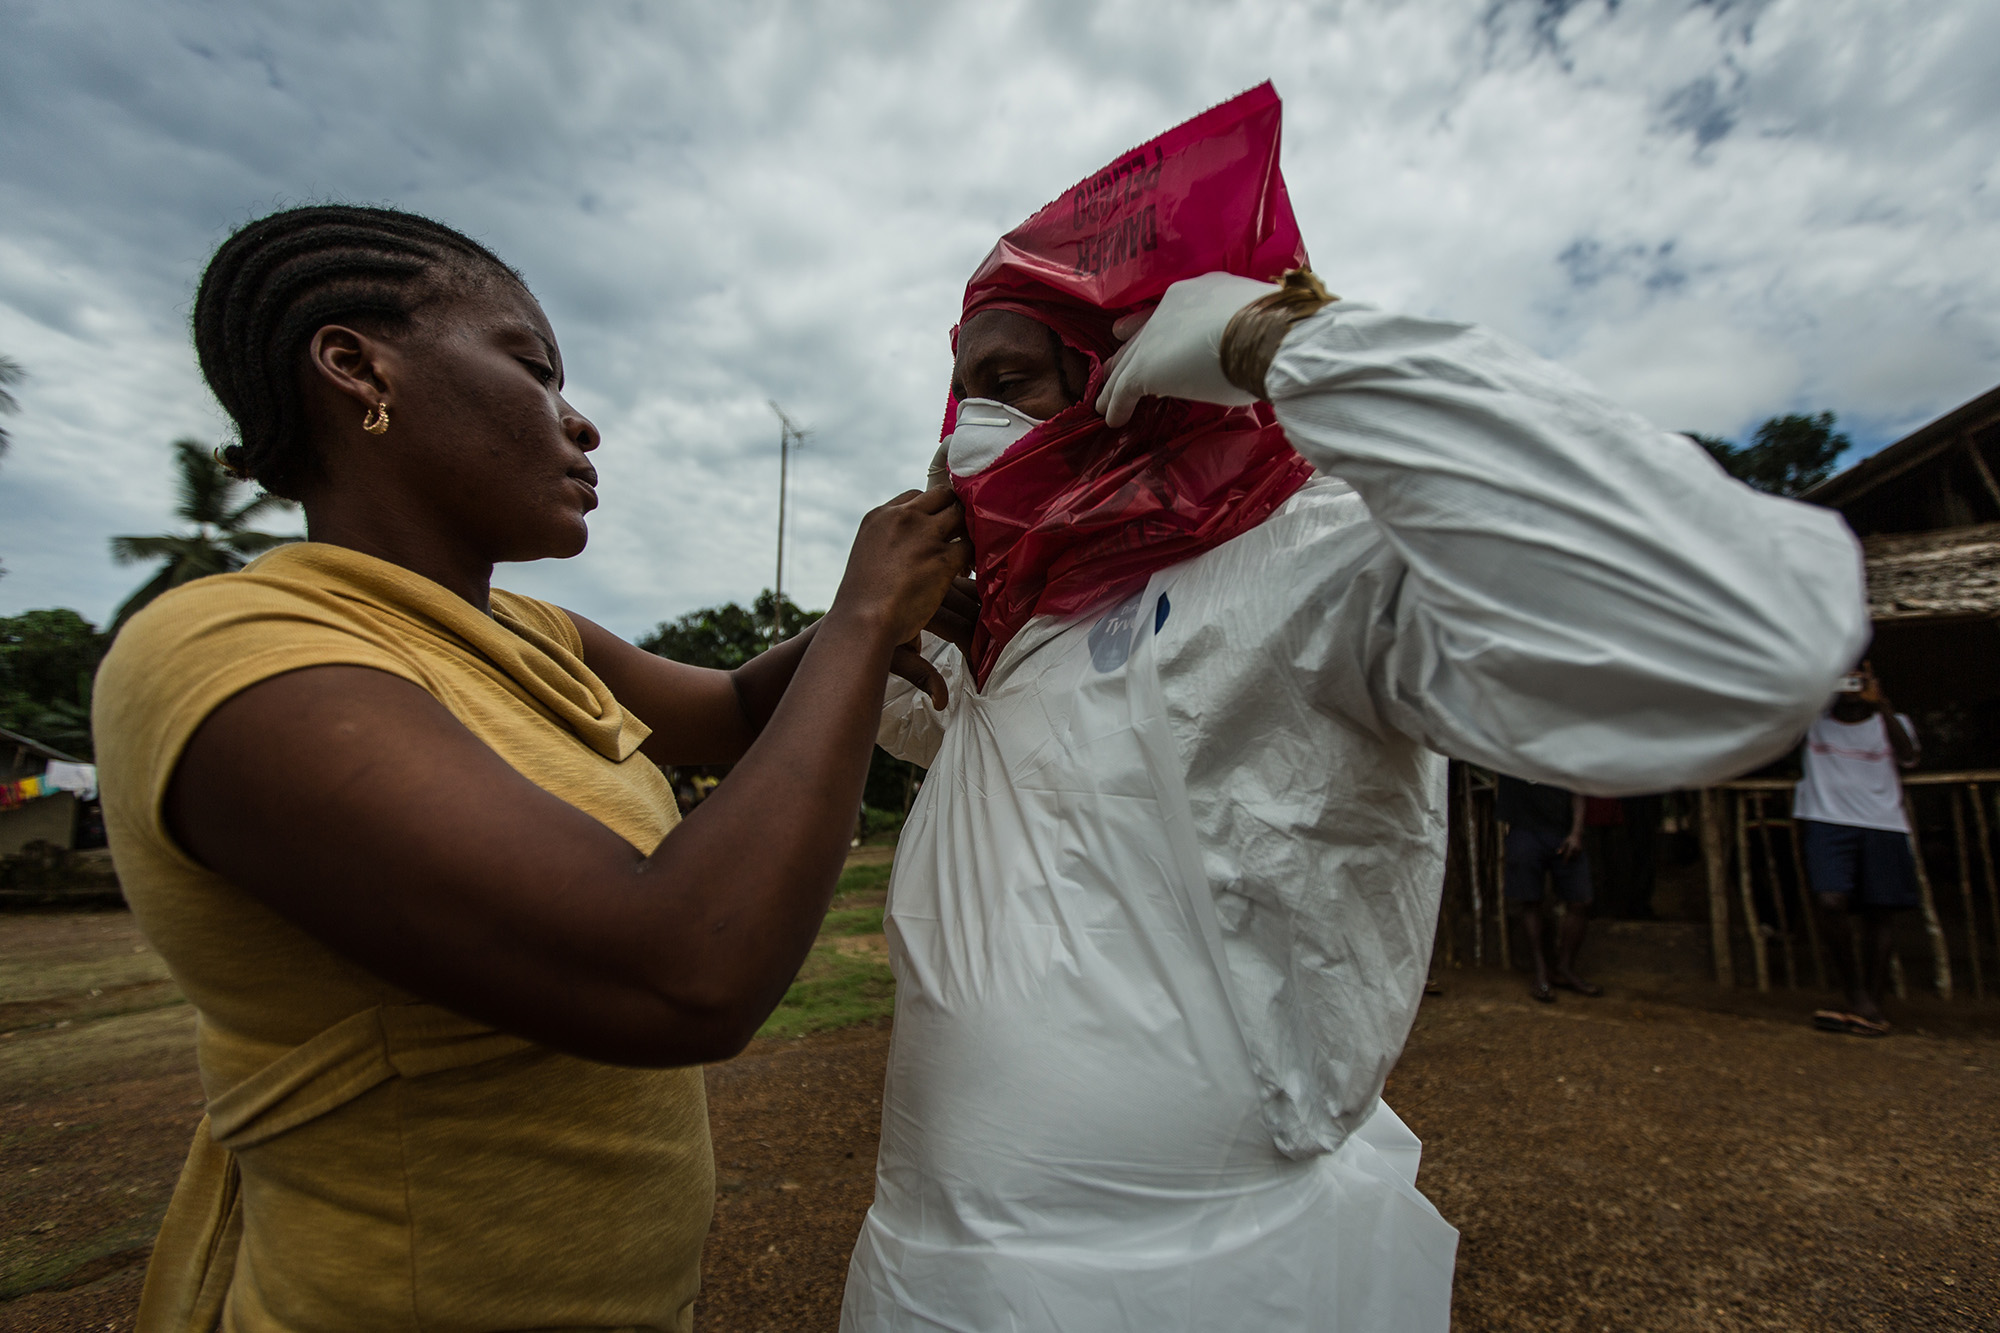  Varbah helps seal Melvin's Personal Protective Equipment (PPE) as he suits up to remove the body of Phelica Anthon,&nbsp;6,&nbsp;in Arthingon, Liberia.&nbsp; 